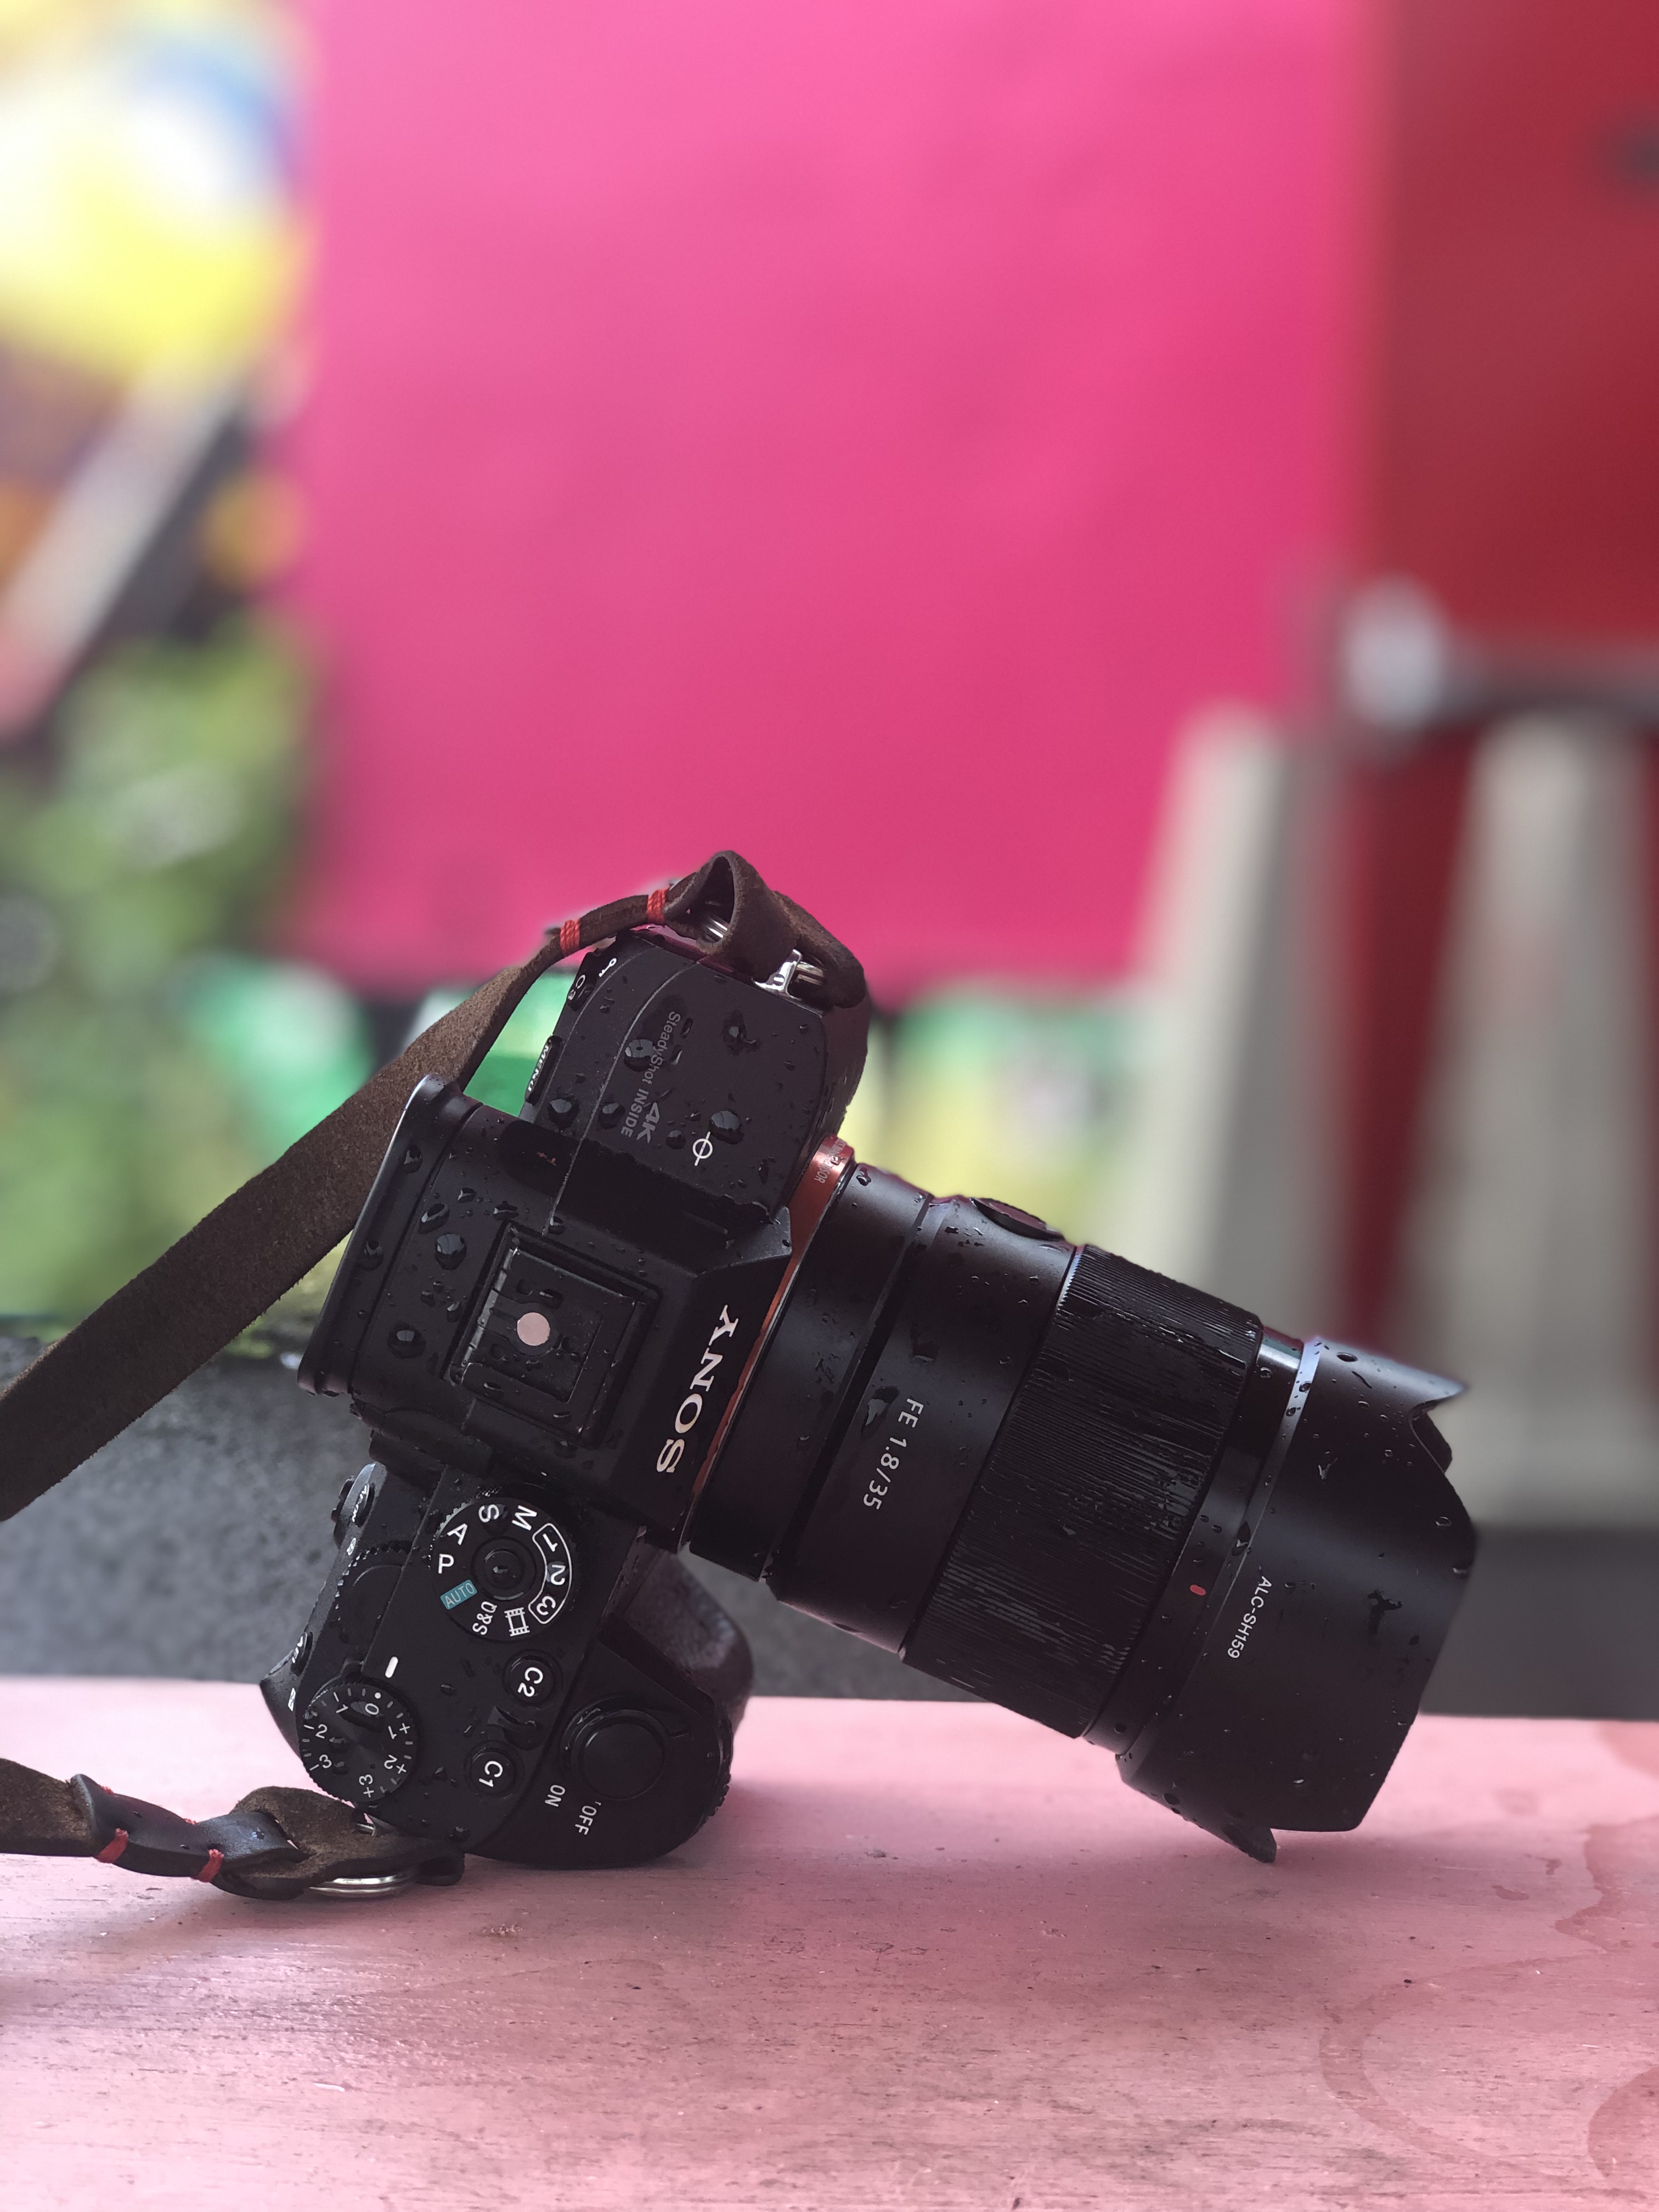 The Sony 35mm F1.8 FE Has Generous Amounts of Weather Sealing